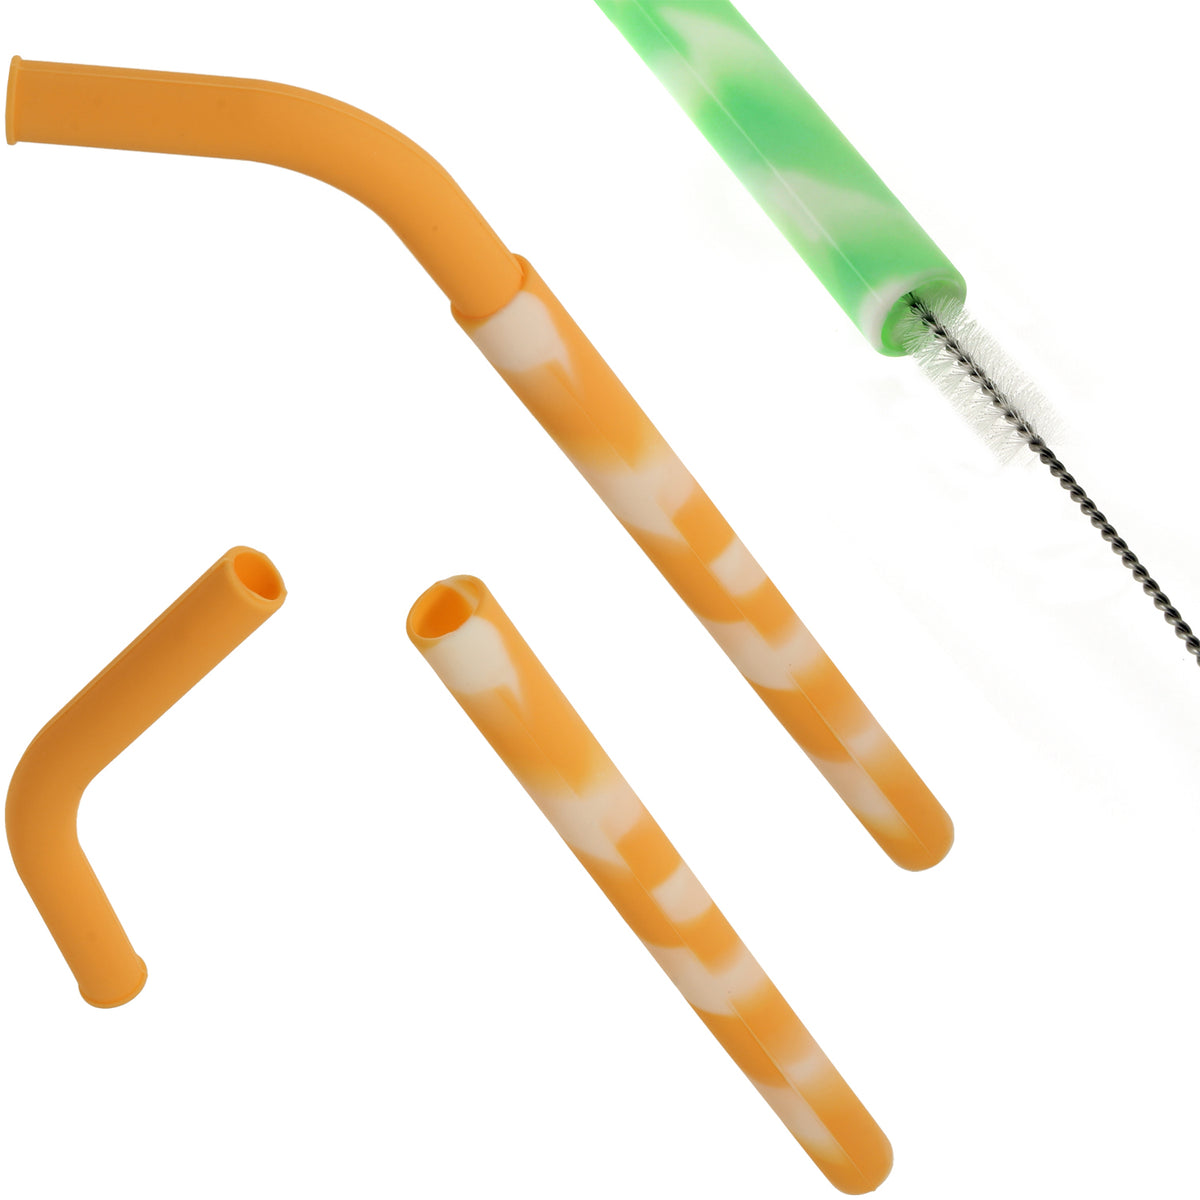 Silicone Biting Straw  Buy Autism Supplies at BrightAutism